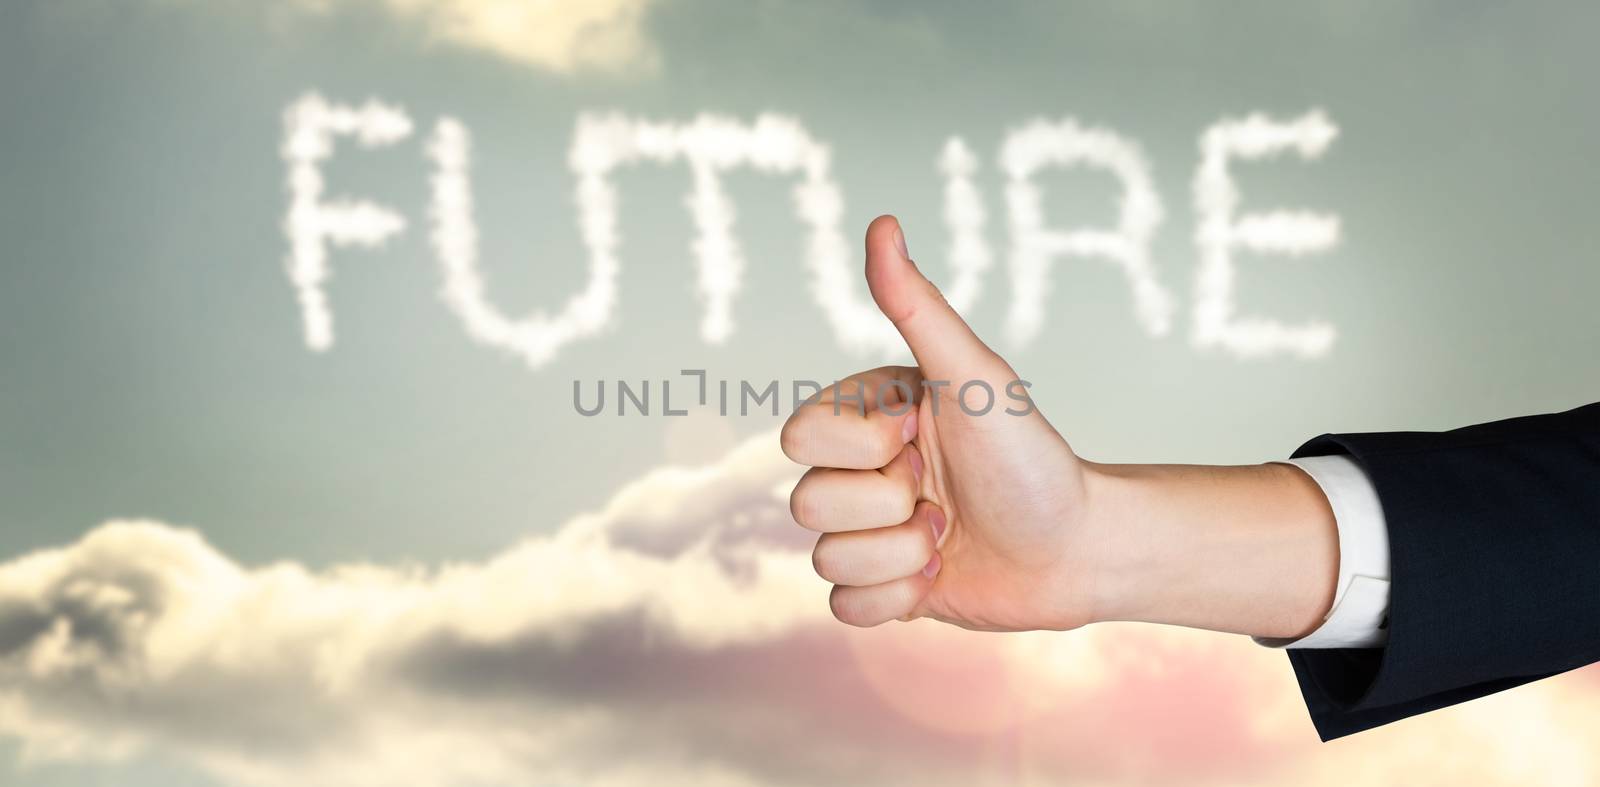 Hand showing thumbs up against clouds spelling out future